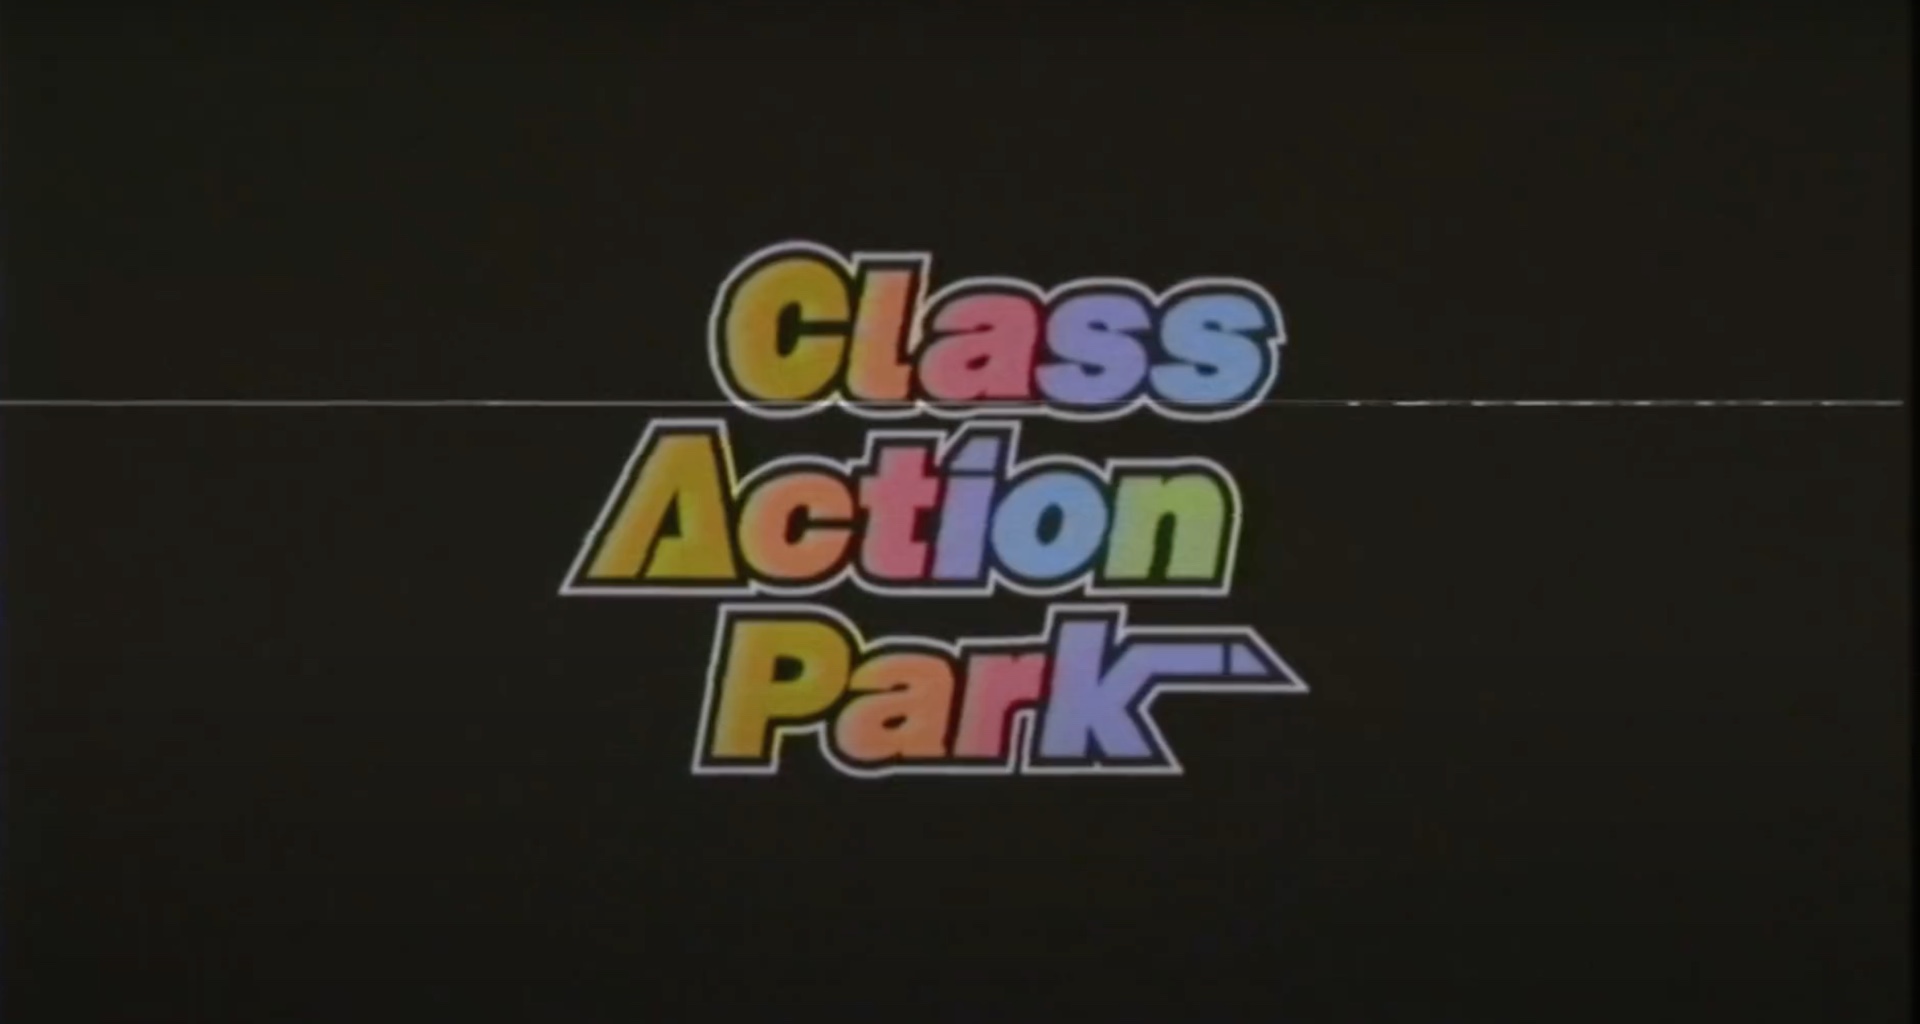 49 HQ Images Action Park Movie Hbo : ACTION POINT Review: A Bunch Of Meatballs | Birth.Movies ...